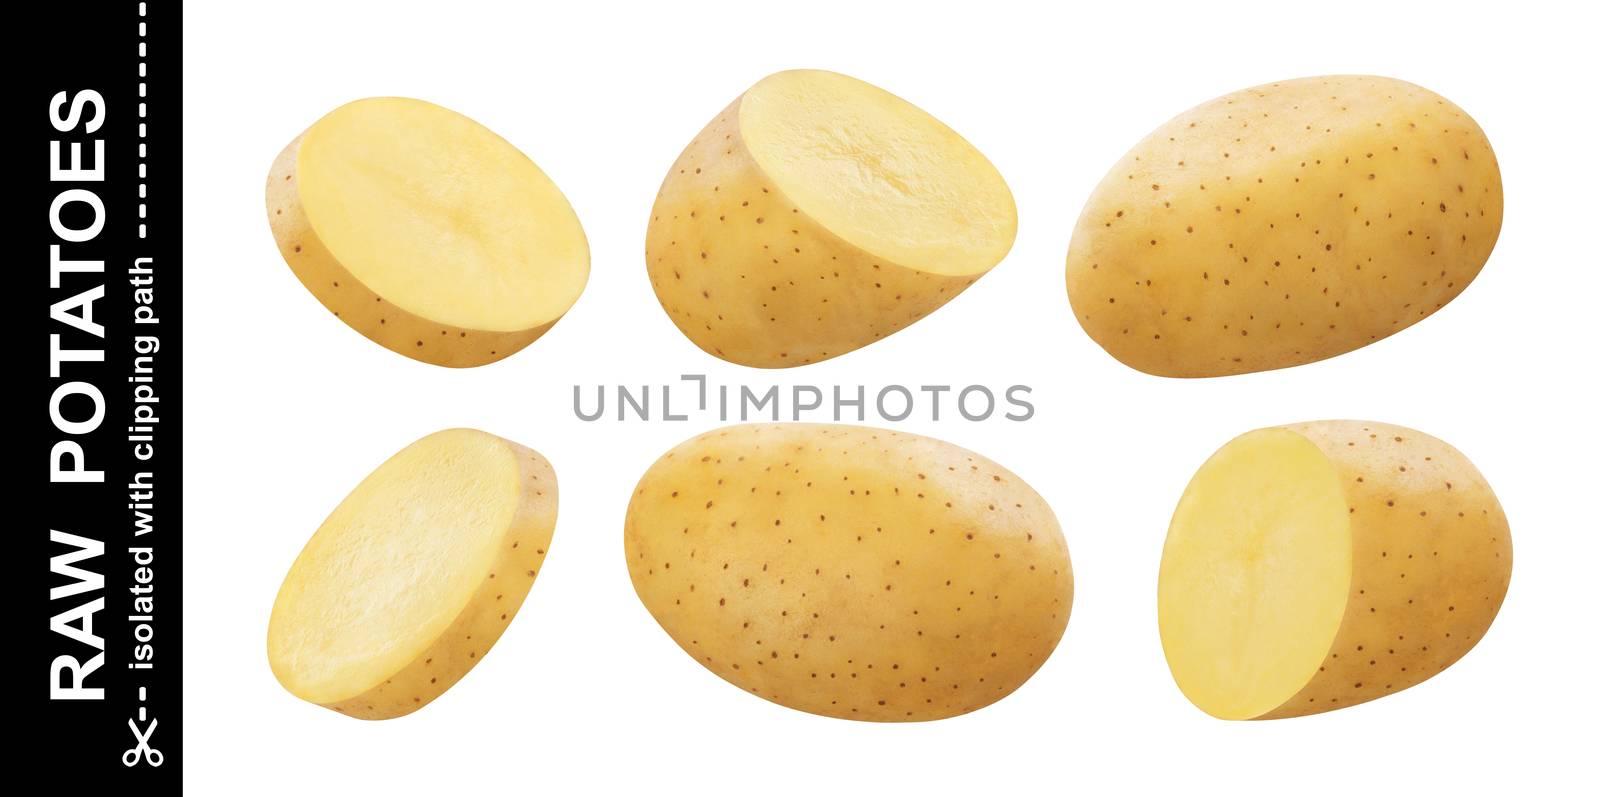 Raw potato isolated on white background with clipping path by xamtiw